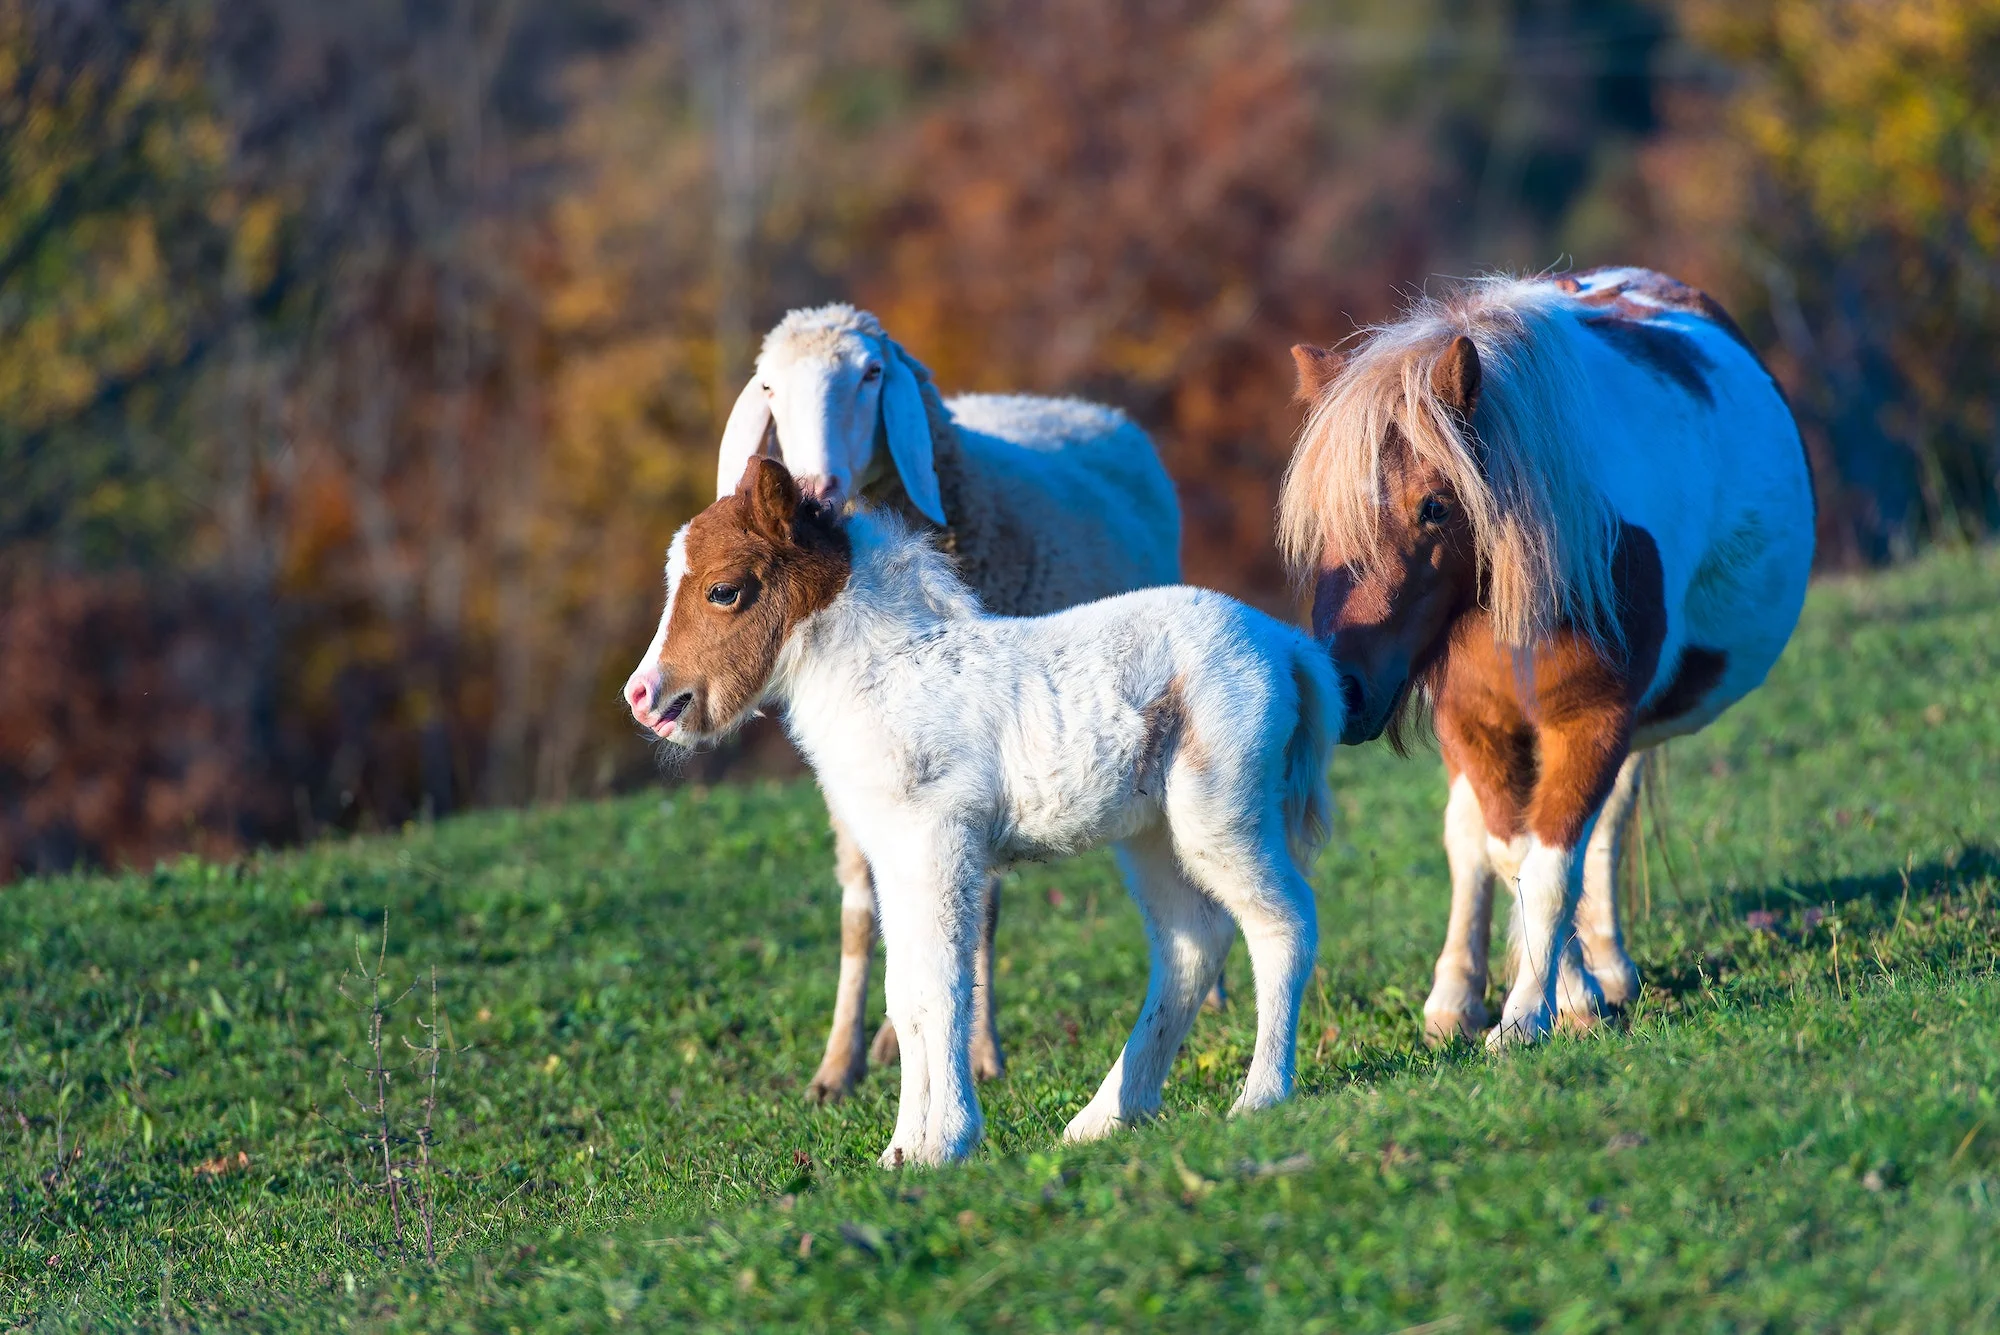 A pony with the small and a sheep